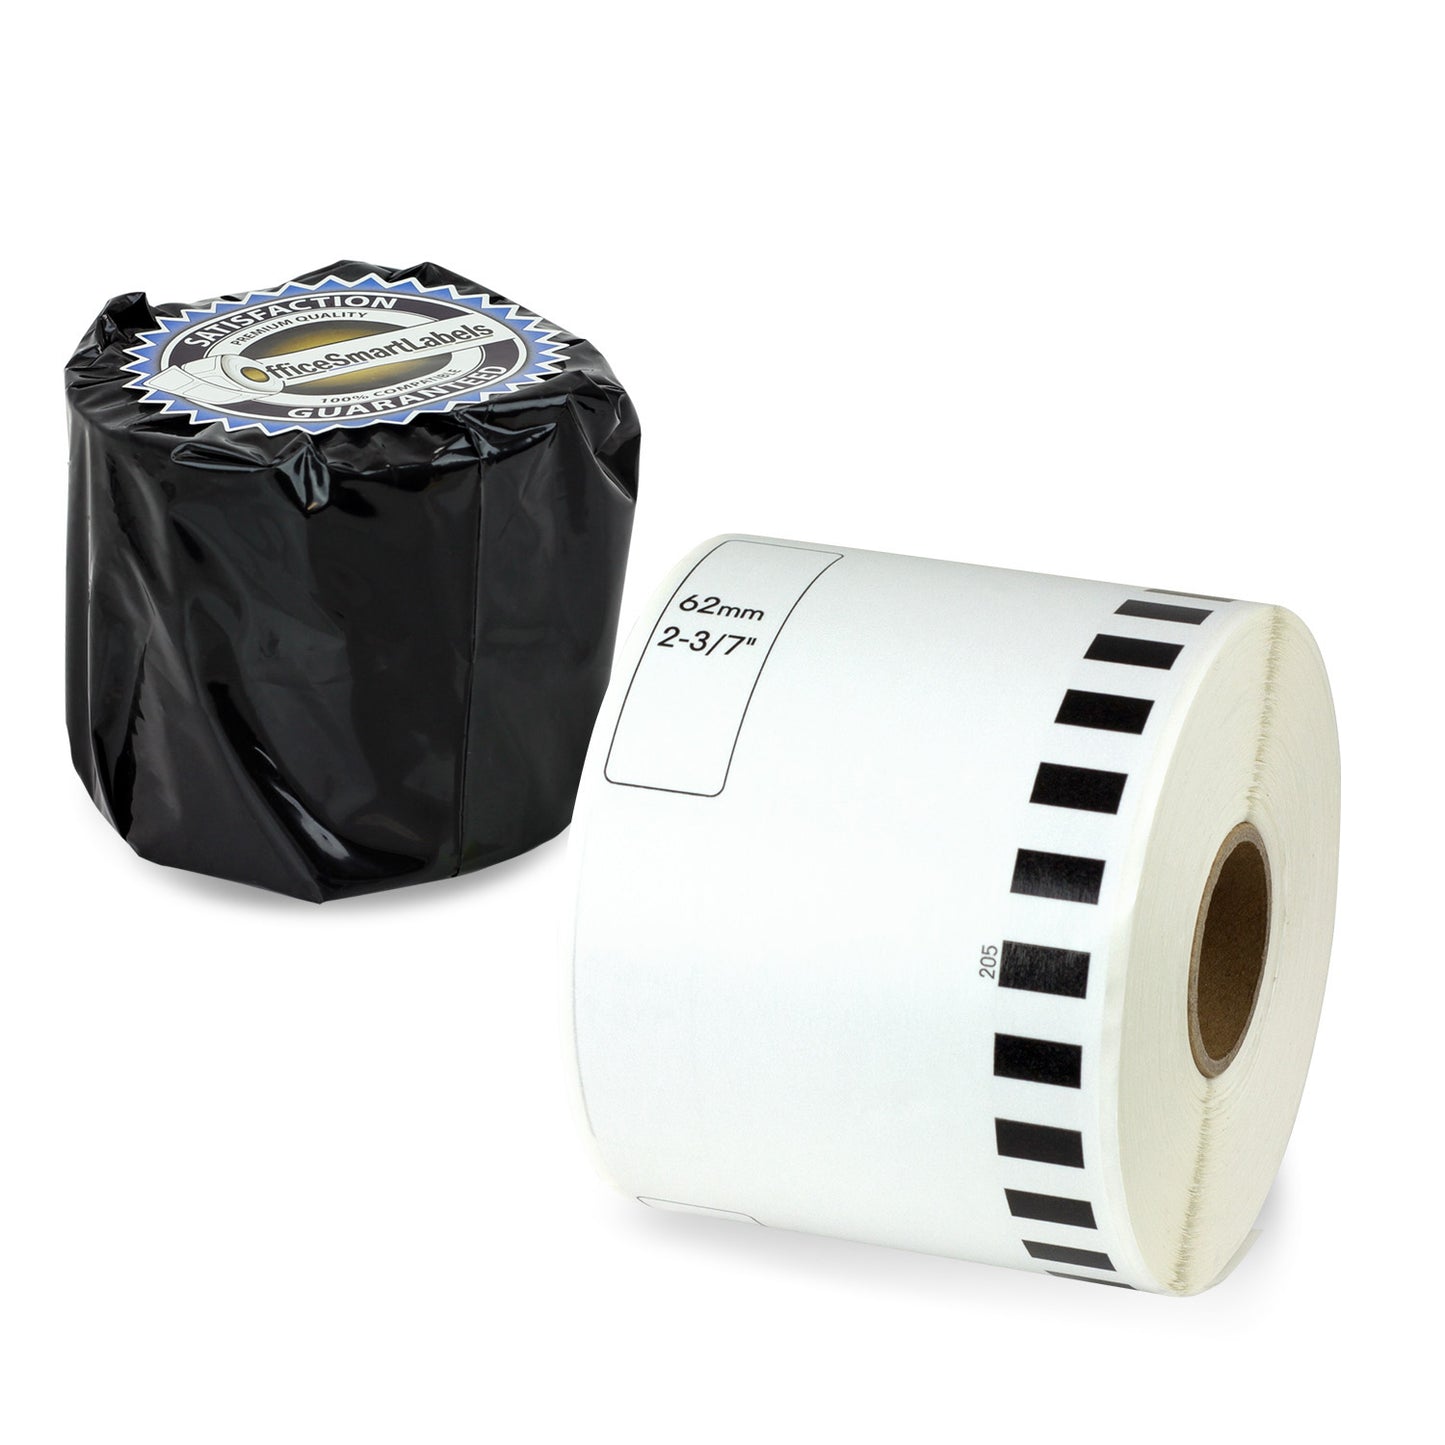 2-3/7 inch x 10 ft. | Brother DK-2205 Compatible - 1 Roll Without Cartridge